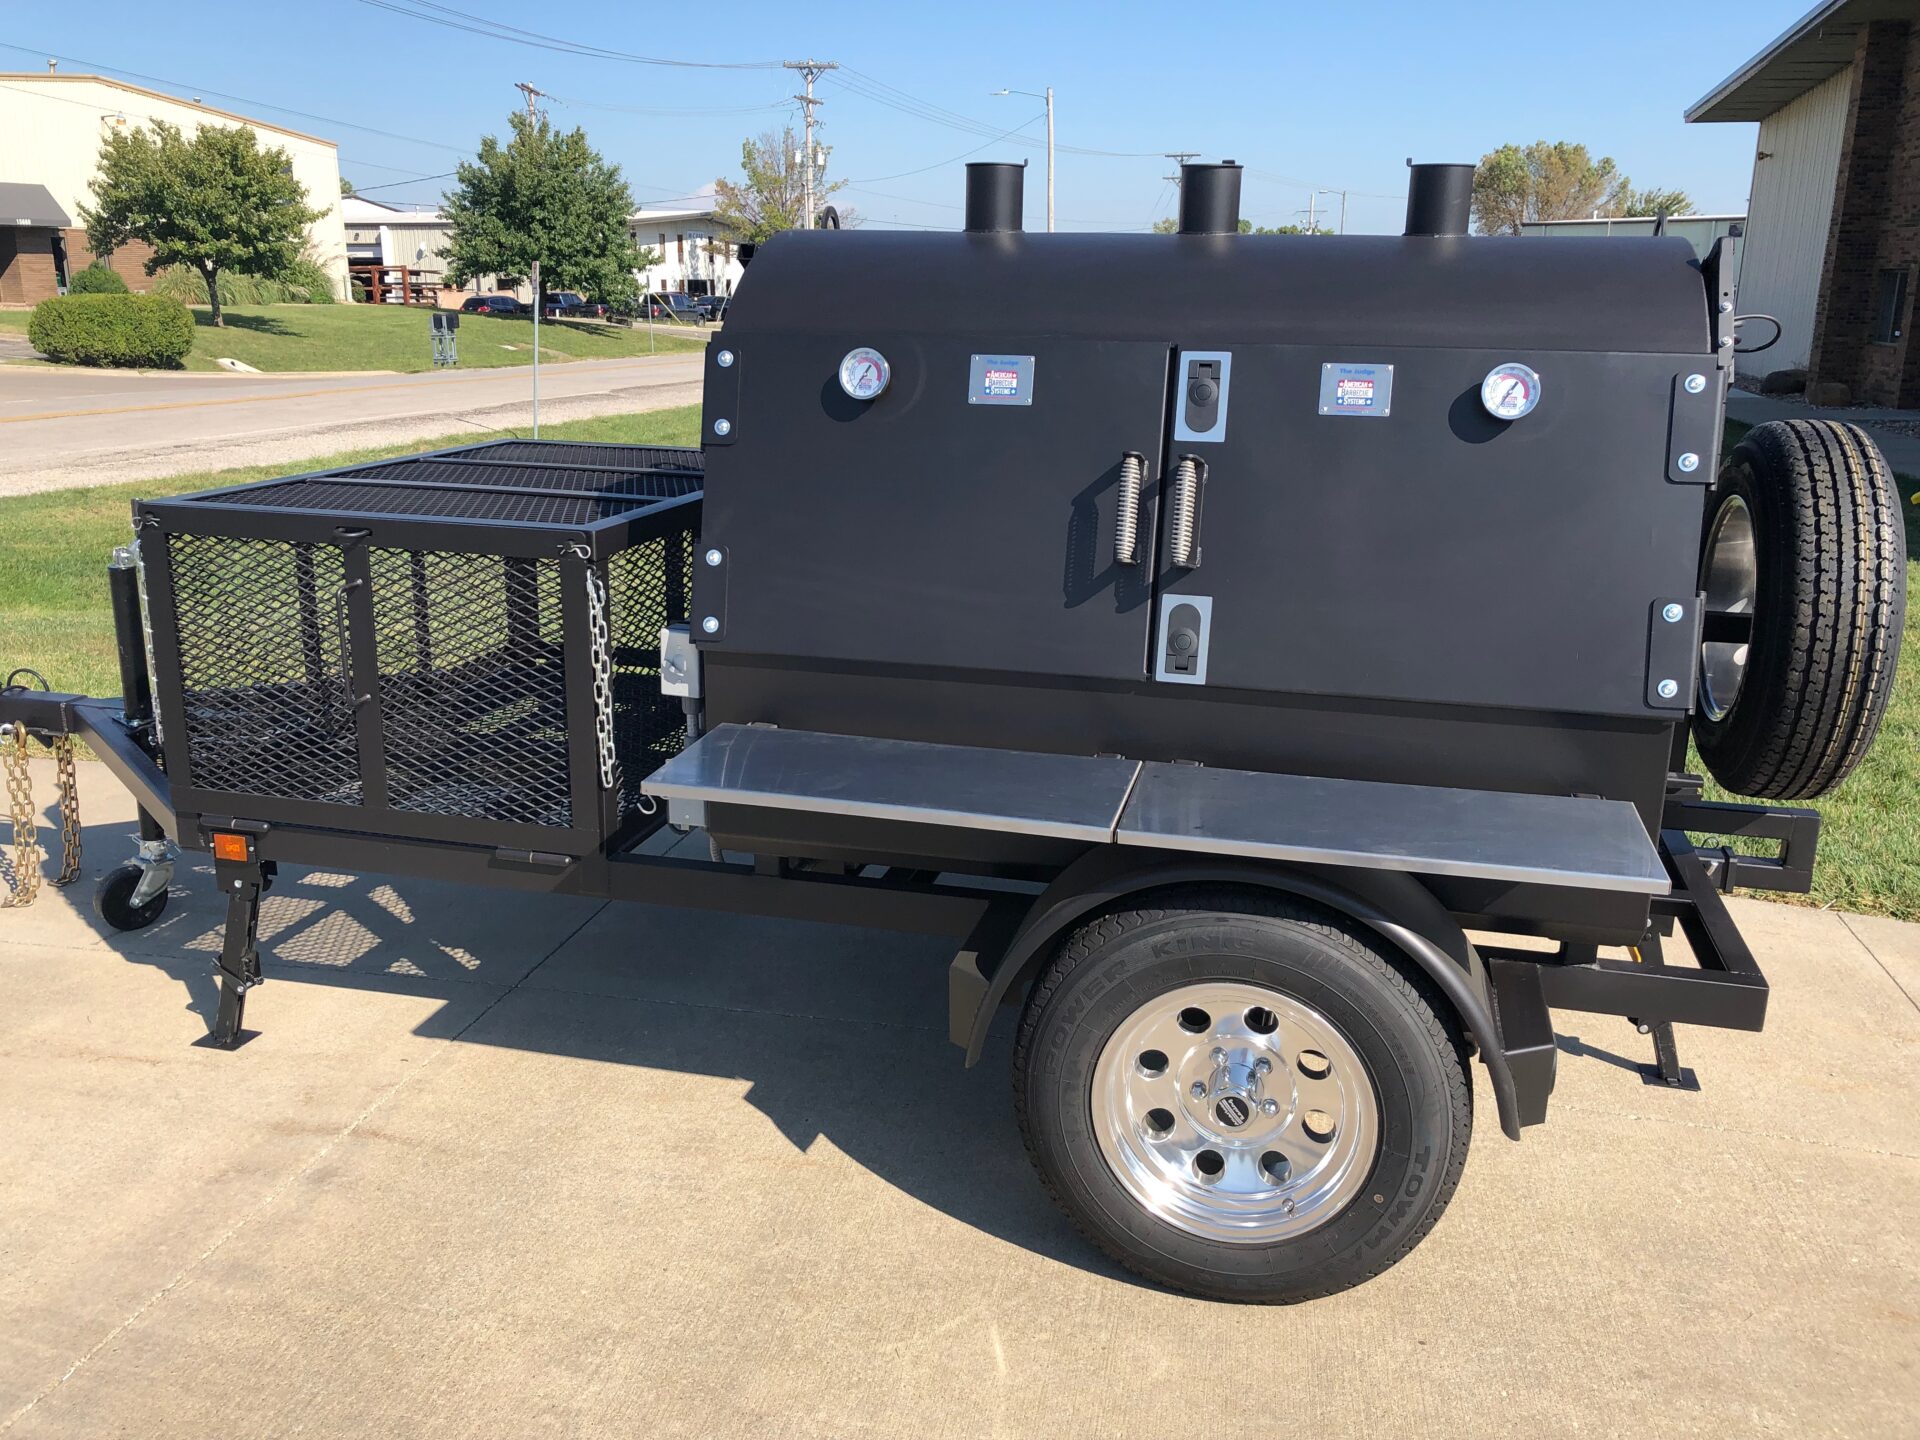 smoker on wheels for easy hauling